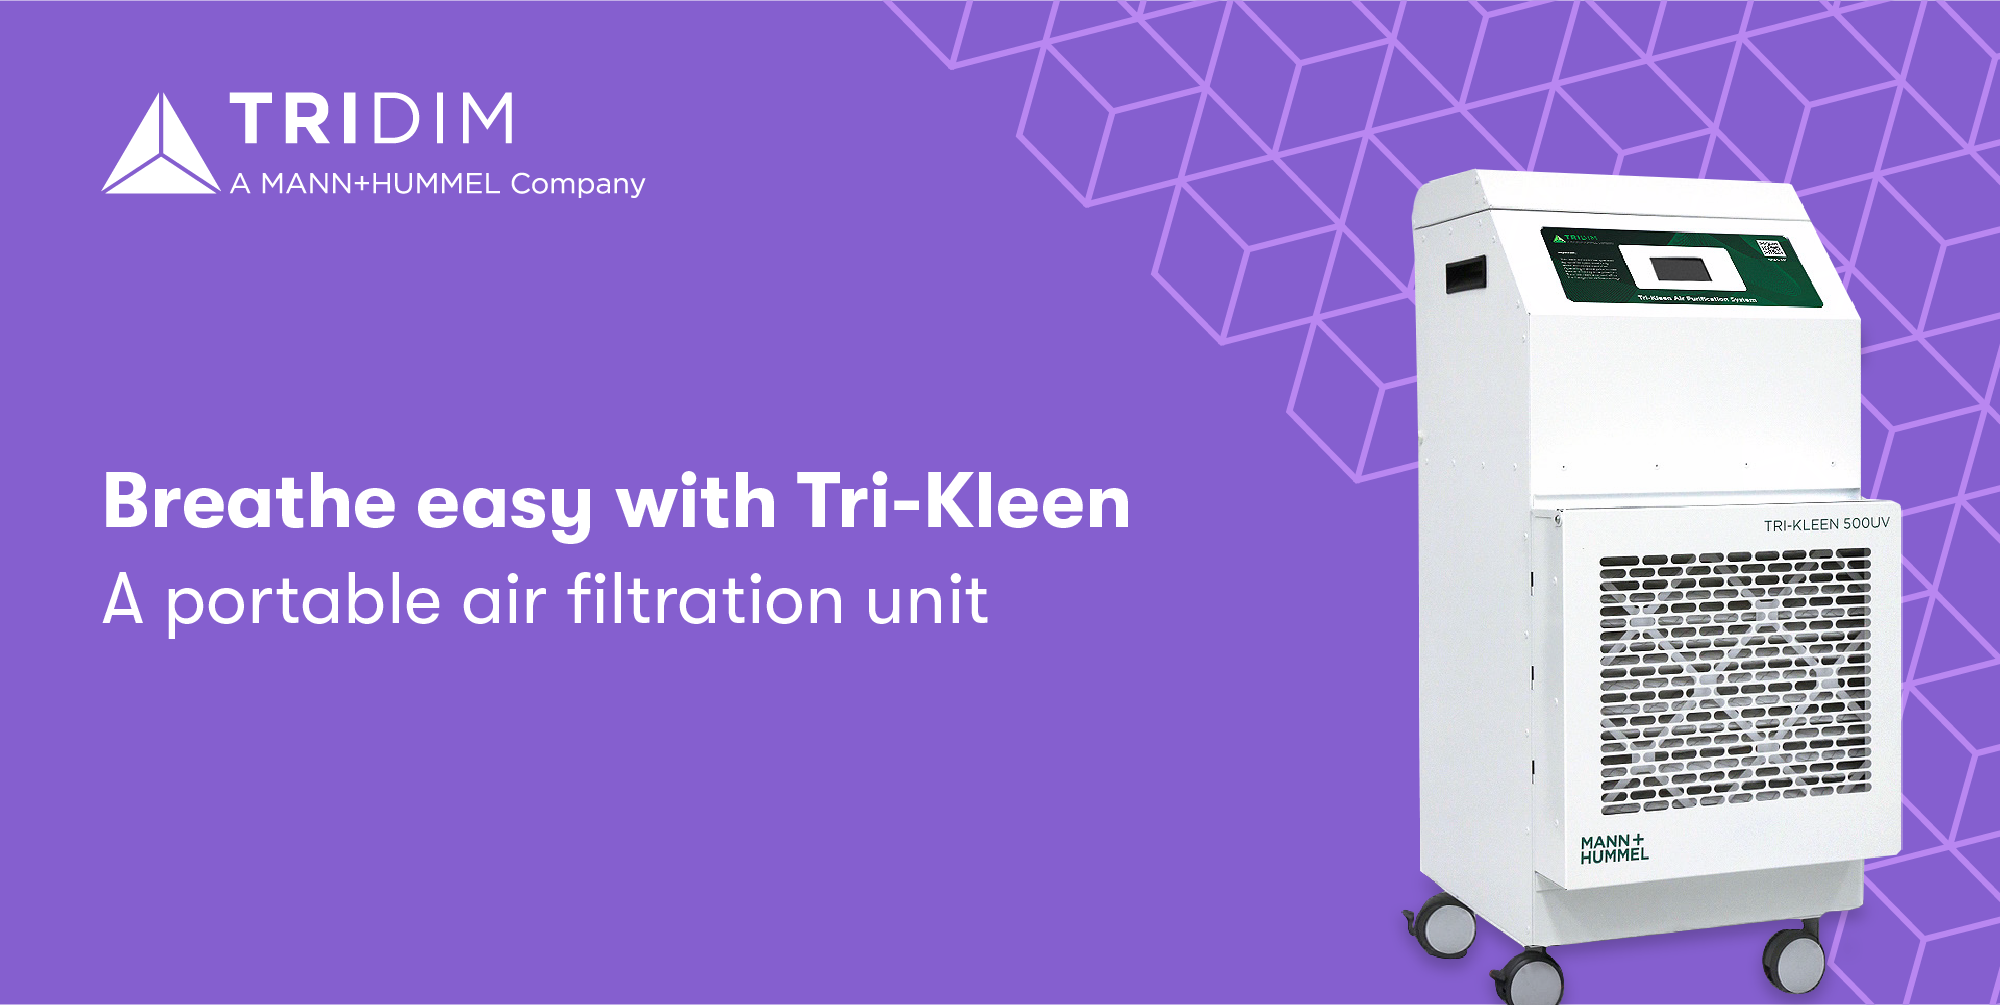 Time for the Tri-Kleen 500UV Portable Air Filtration Unit